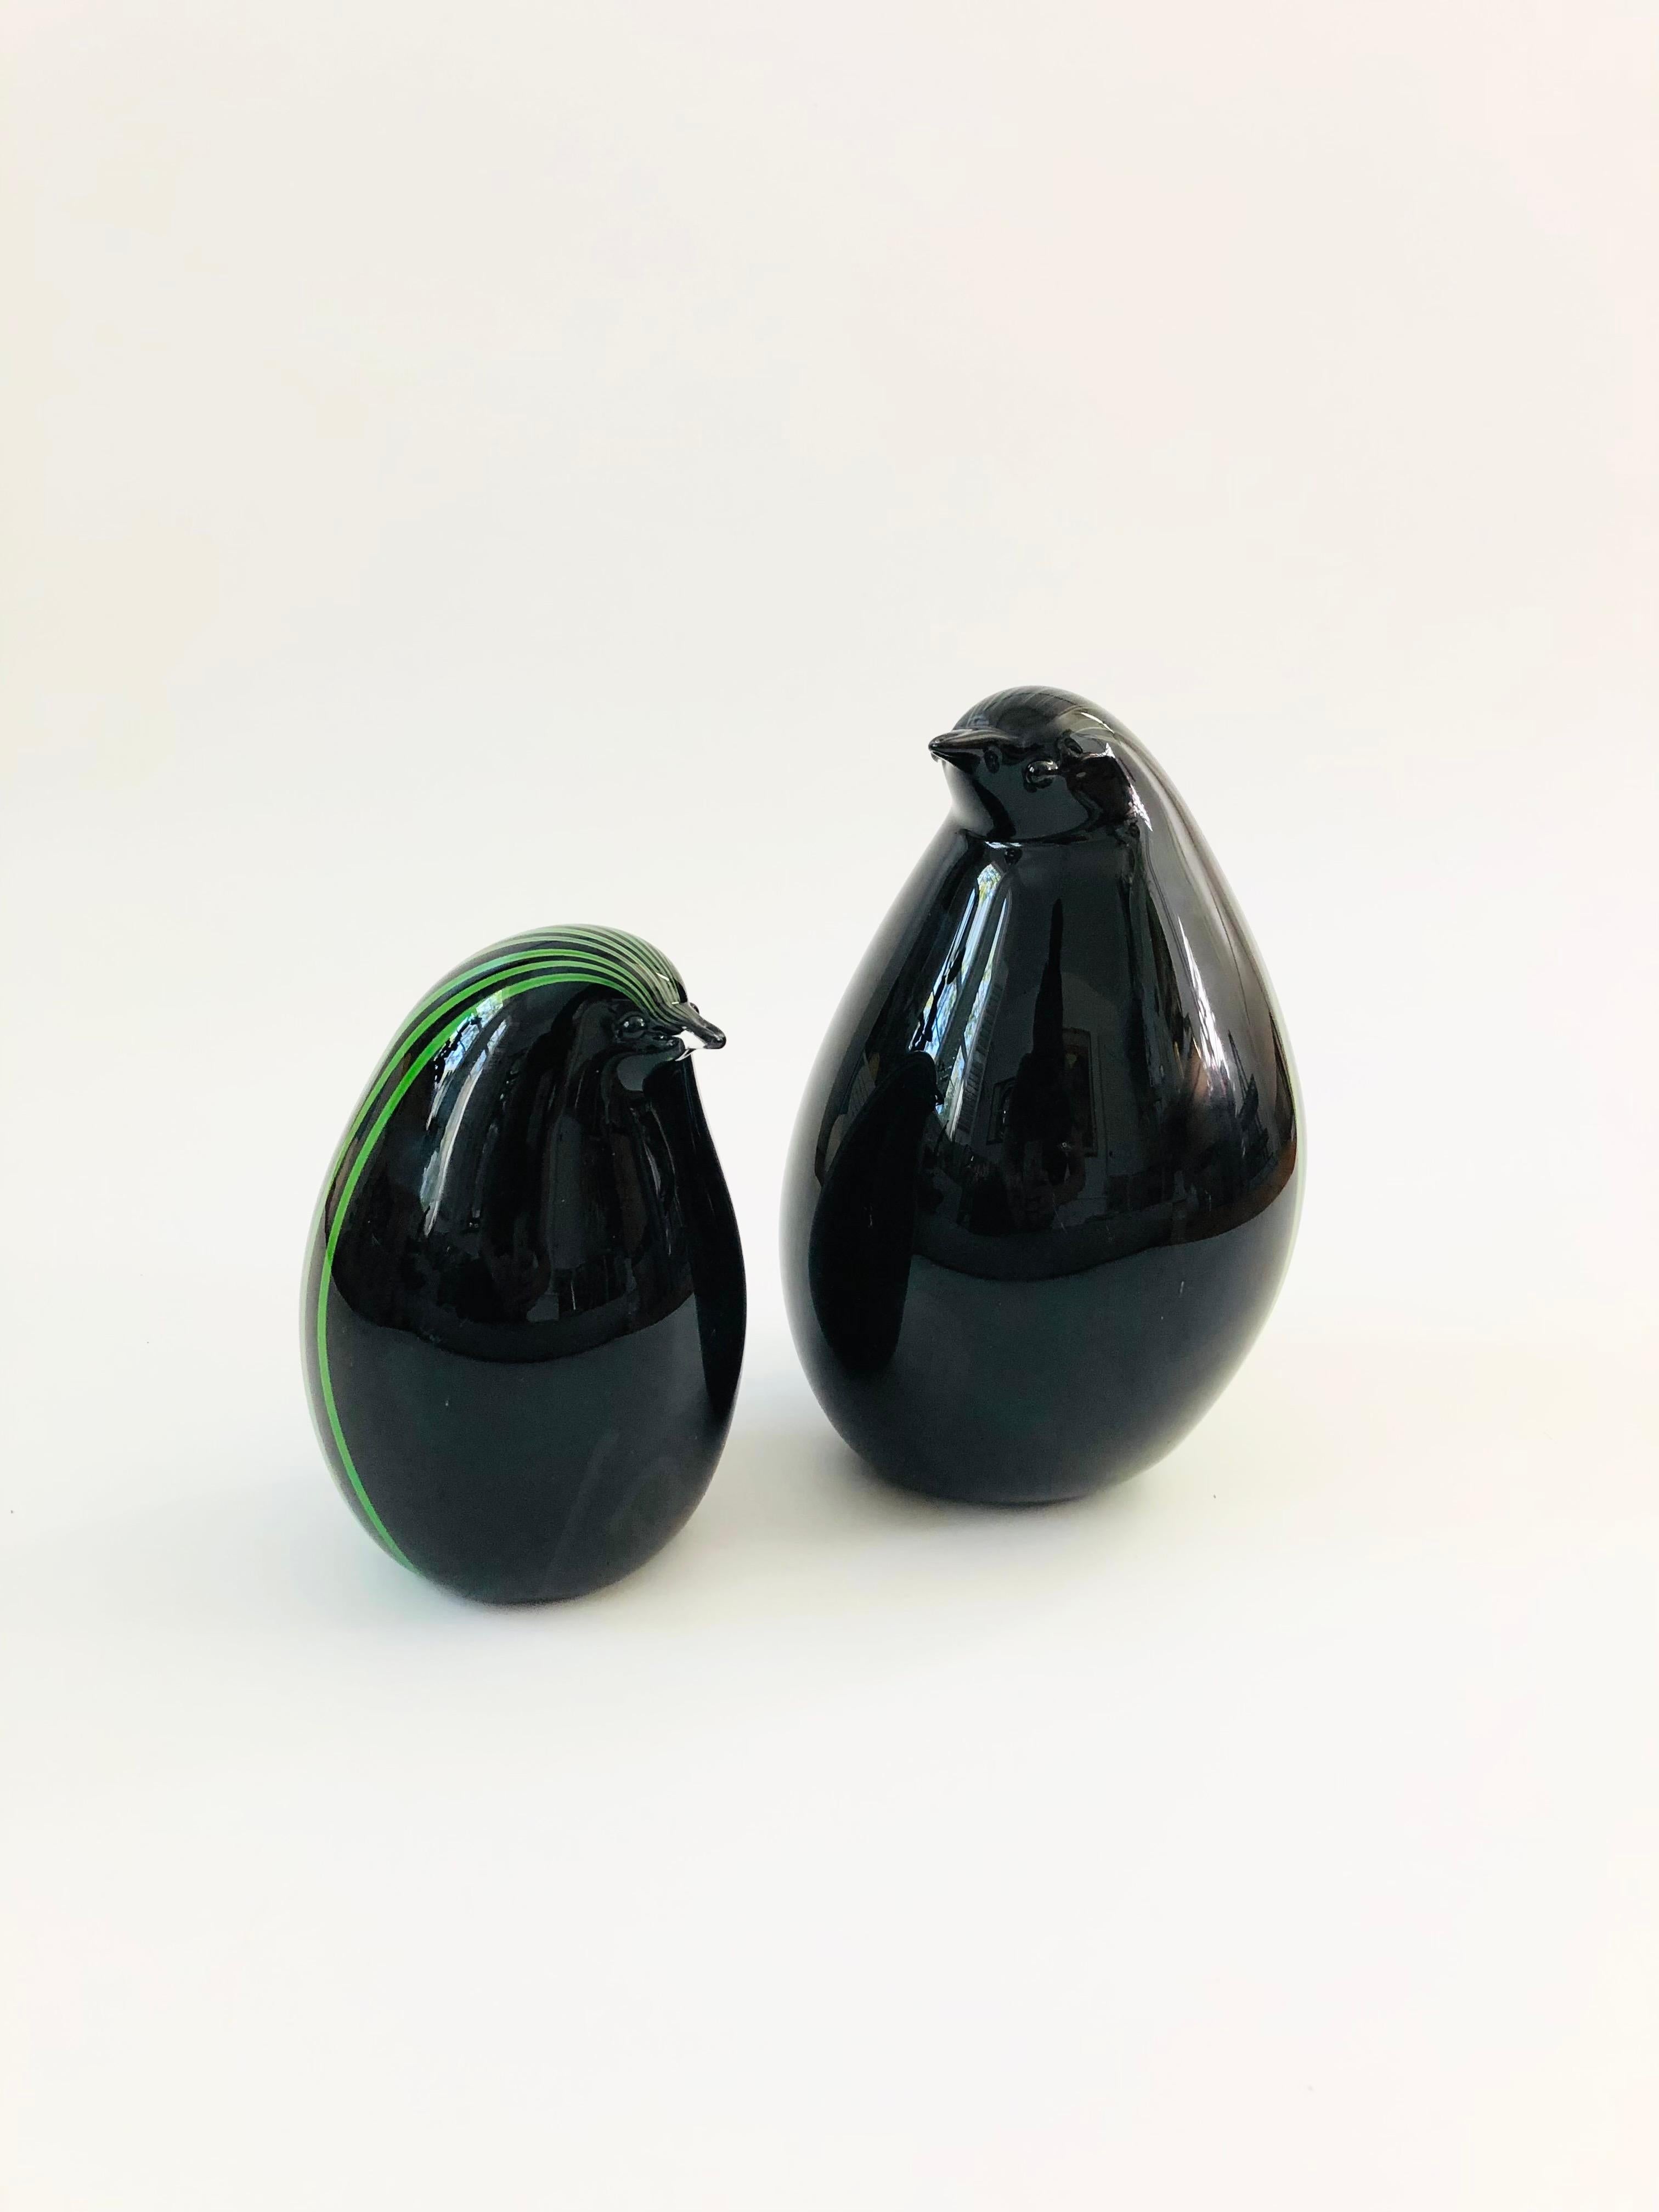 A set of 2 beautiful art glass penguins made by Livio Seguso for Murano. Beautiful vibrant green stripes to the back of each penguin encased in black glass. Nice rounded shapes, no signature, though the form is known to be by Livio Seguso estimated